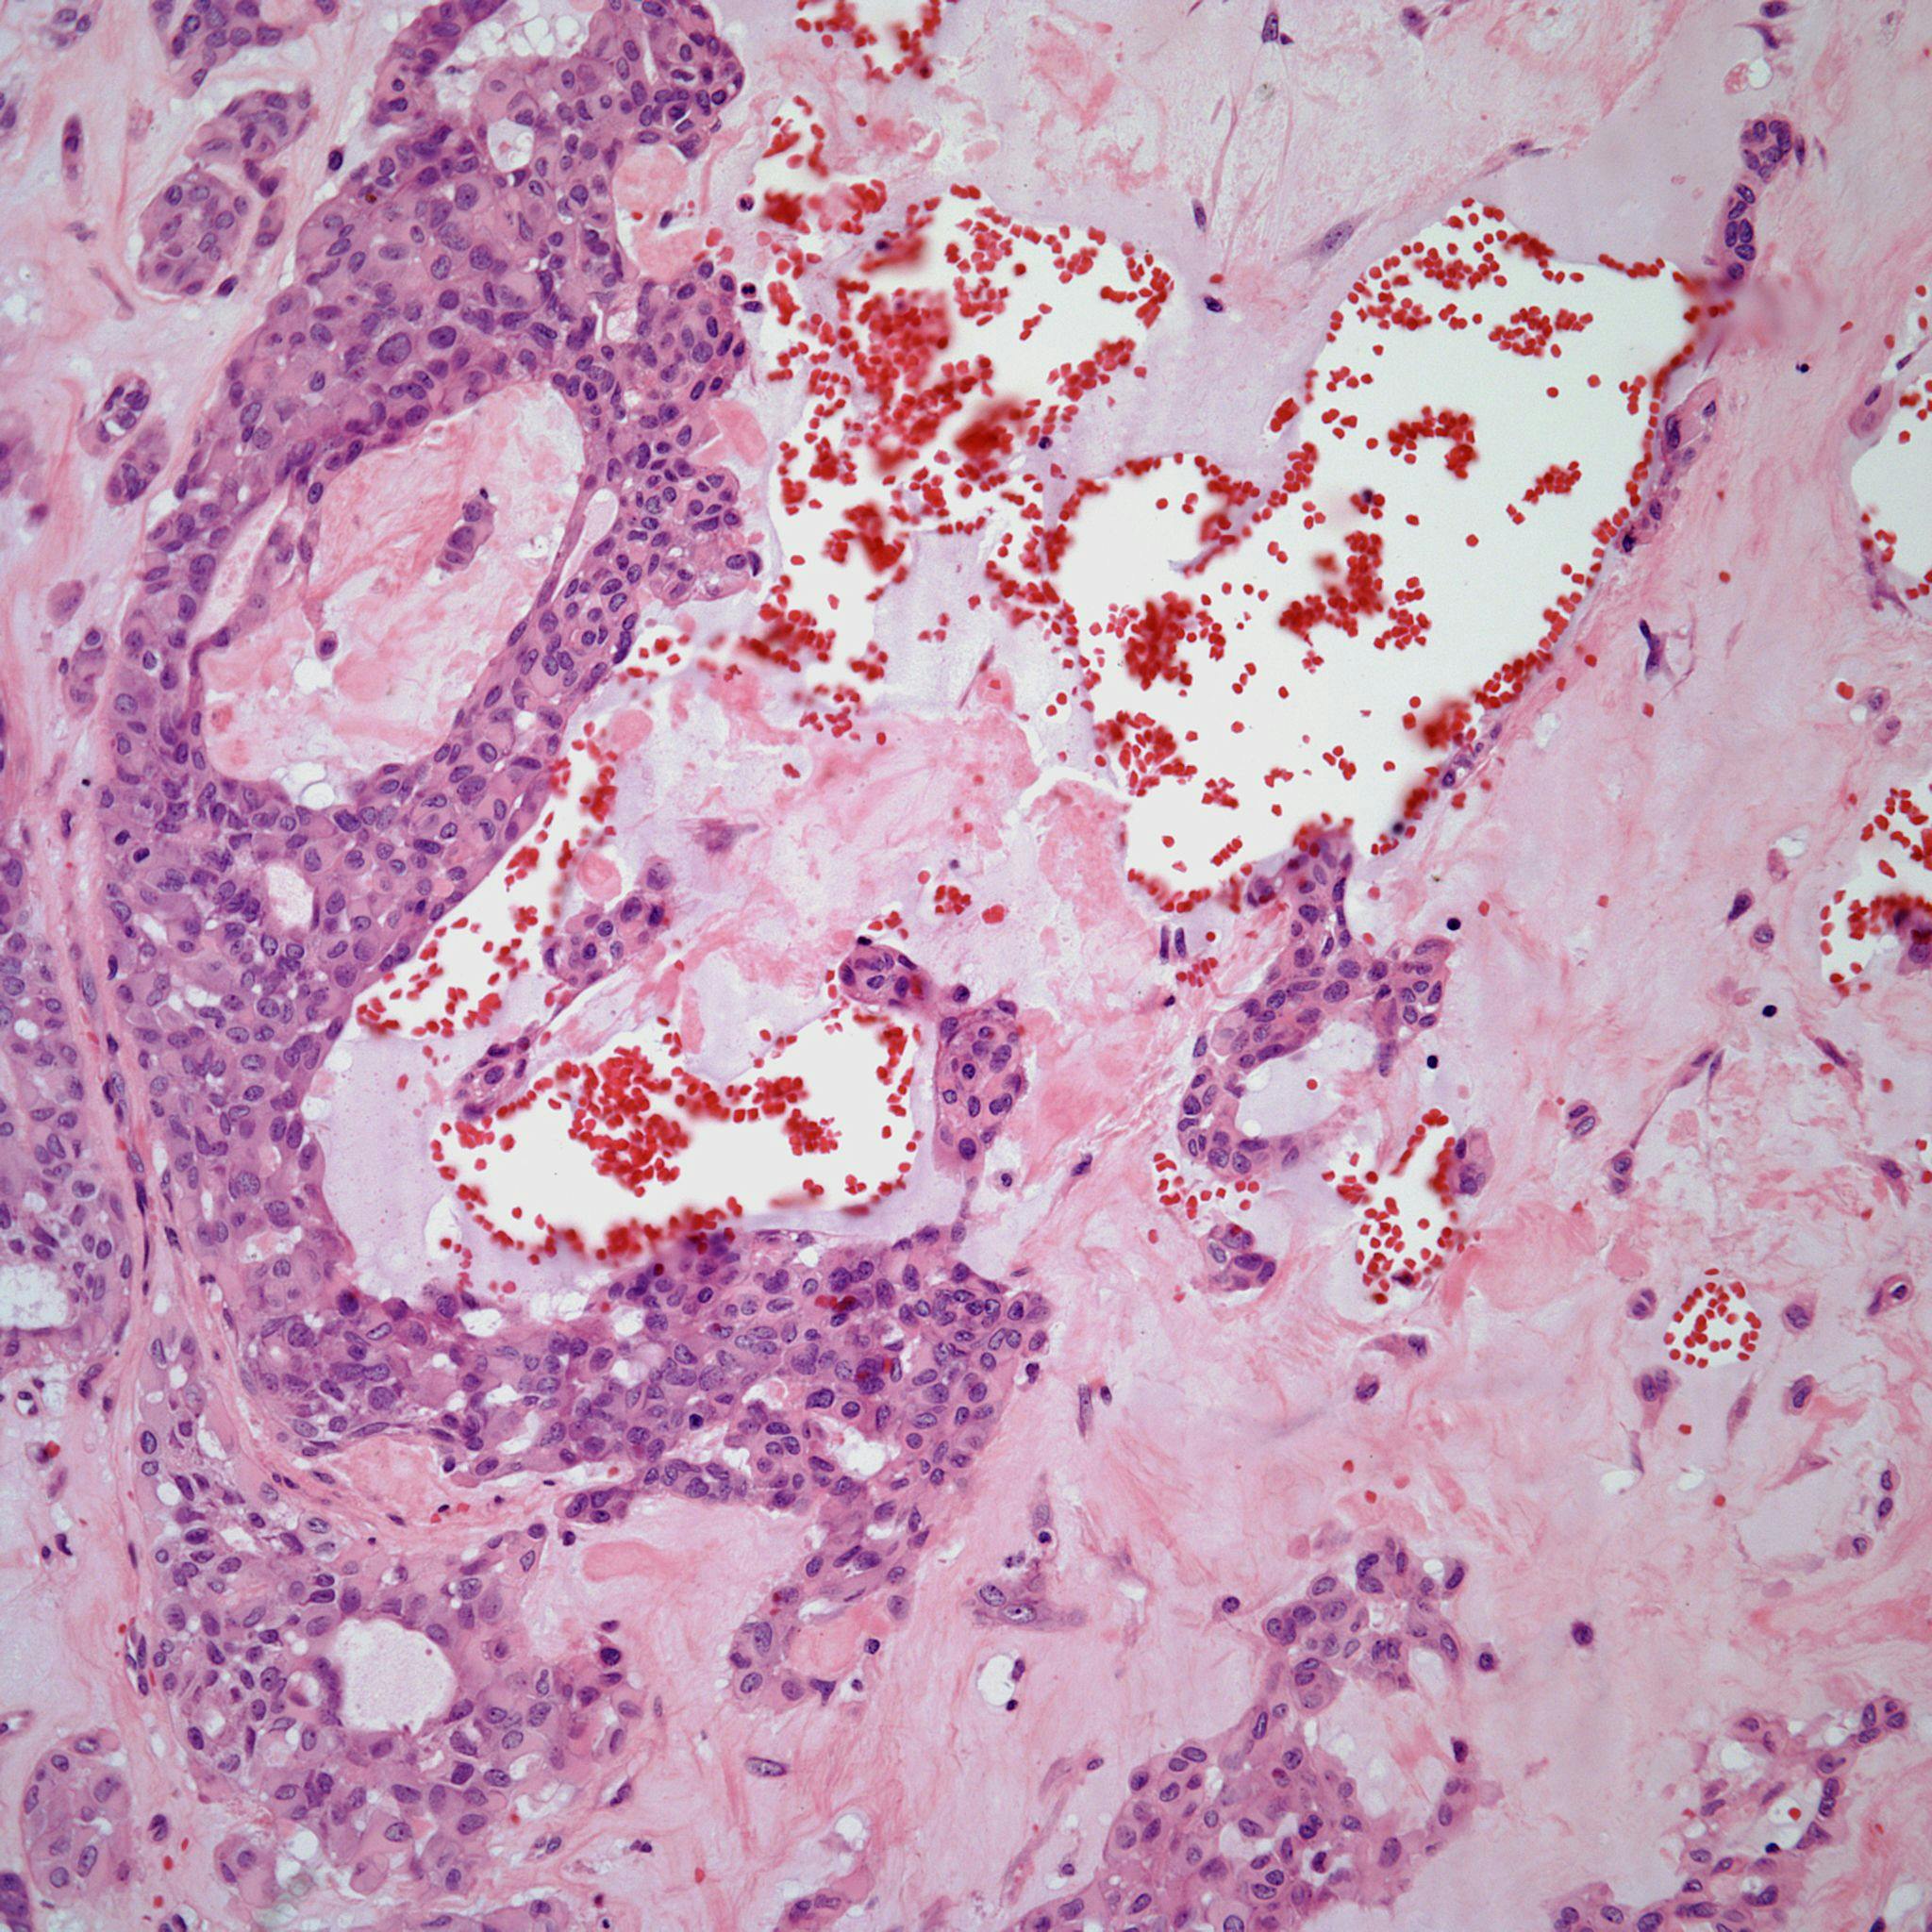  A 41-Year-Old Woman With a Mass in Her Breast